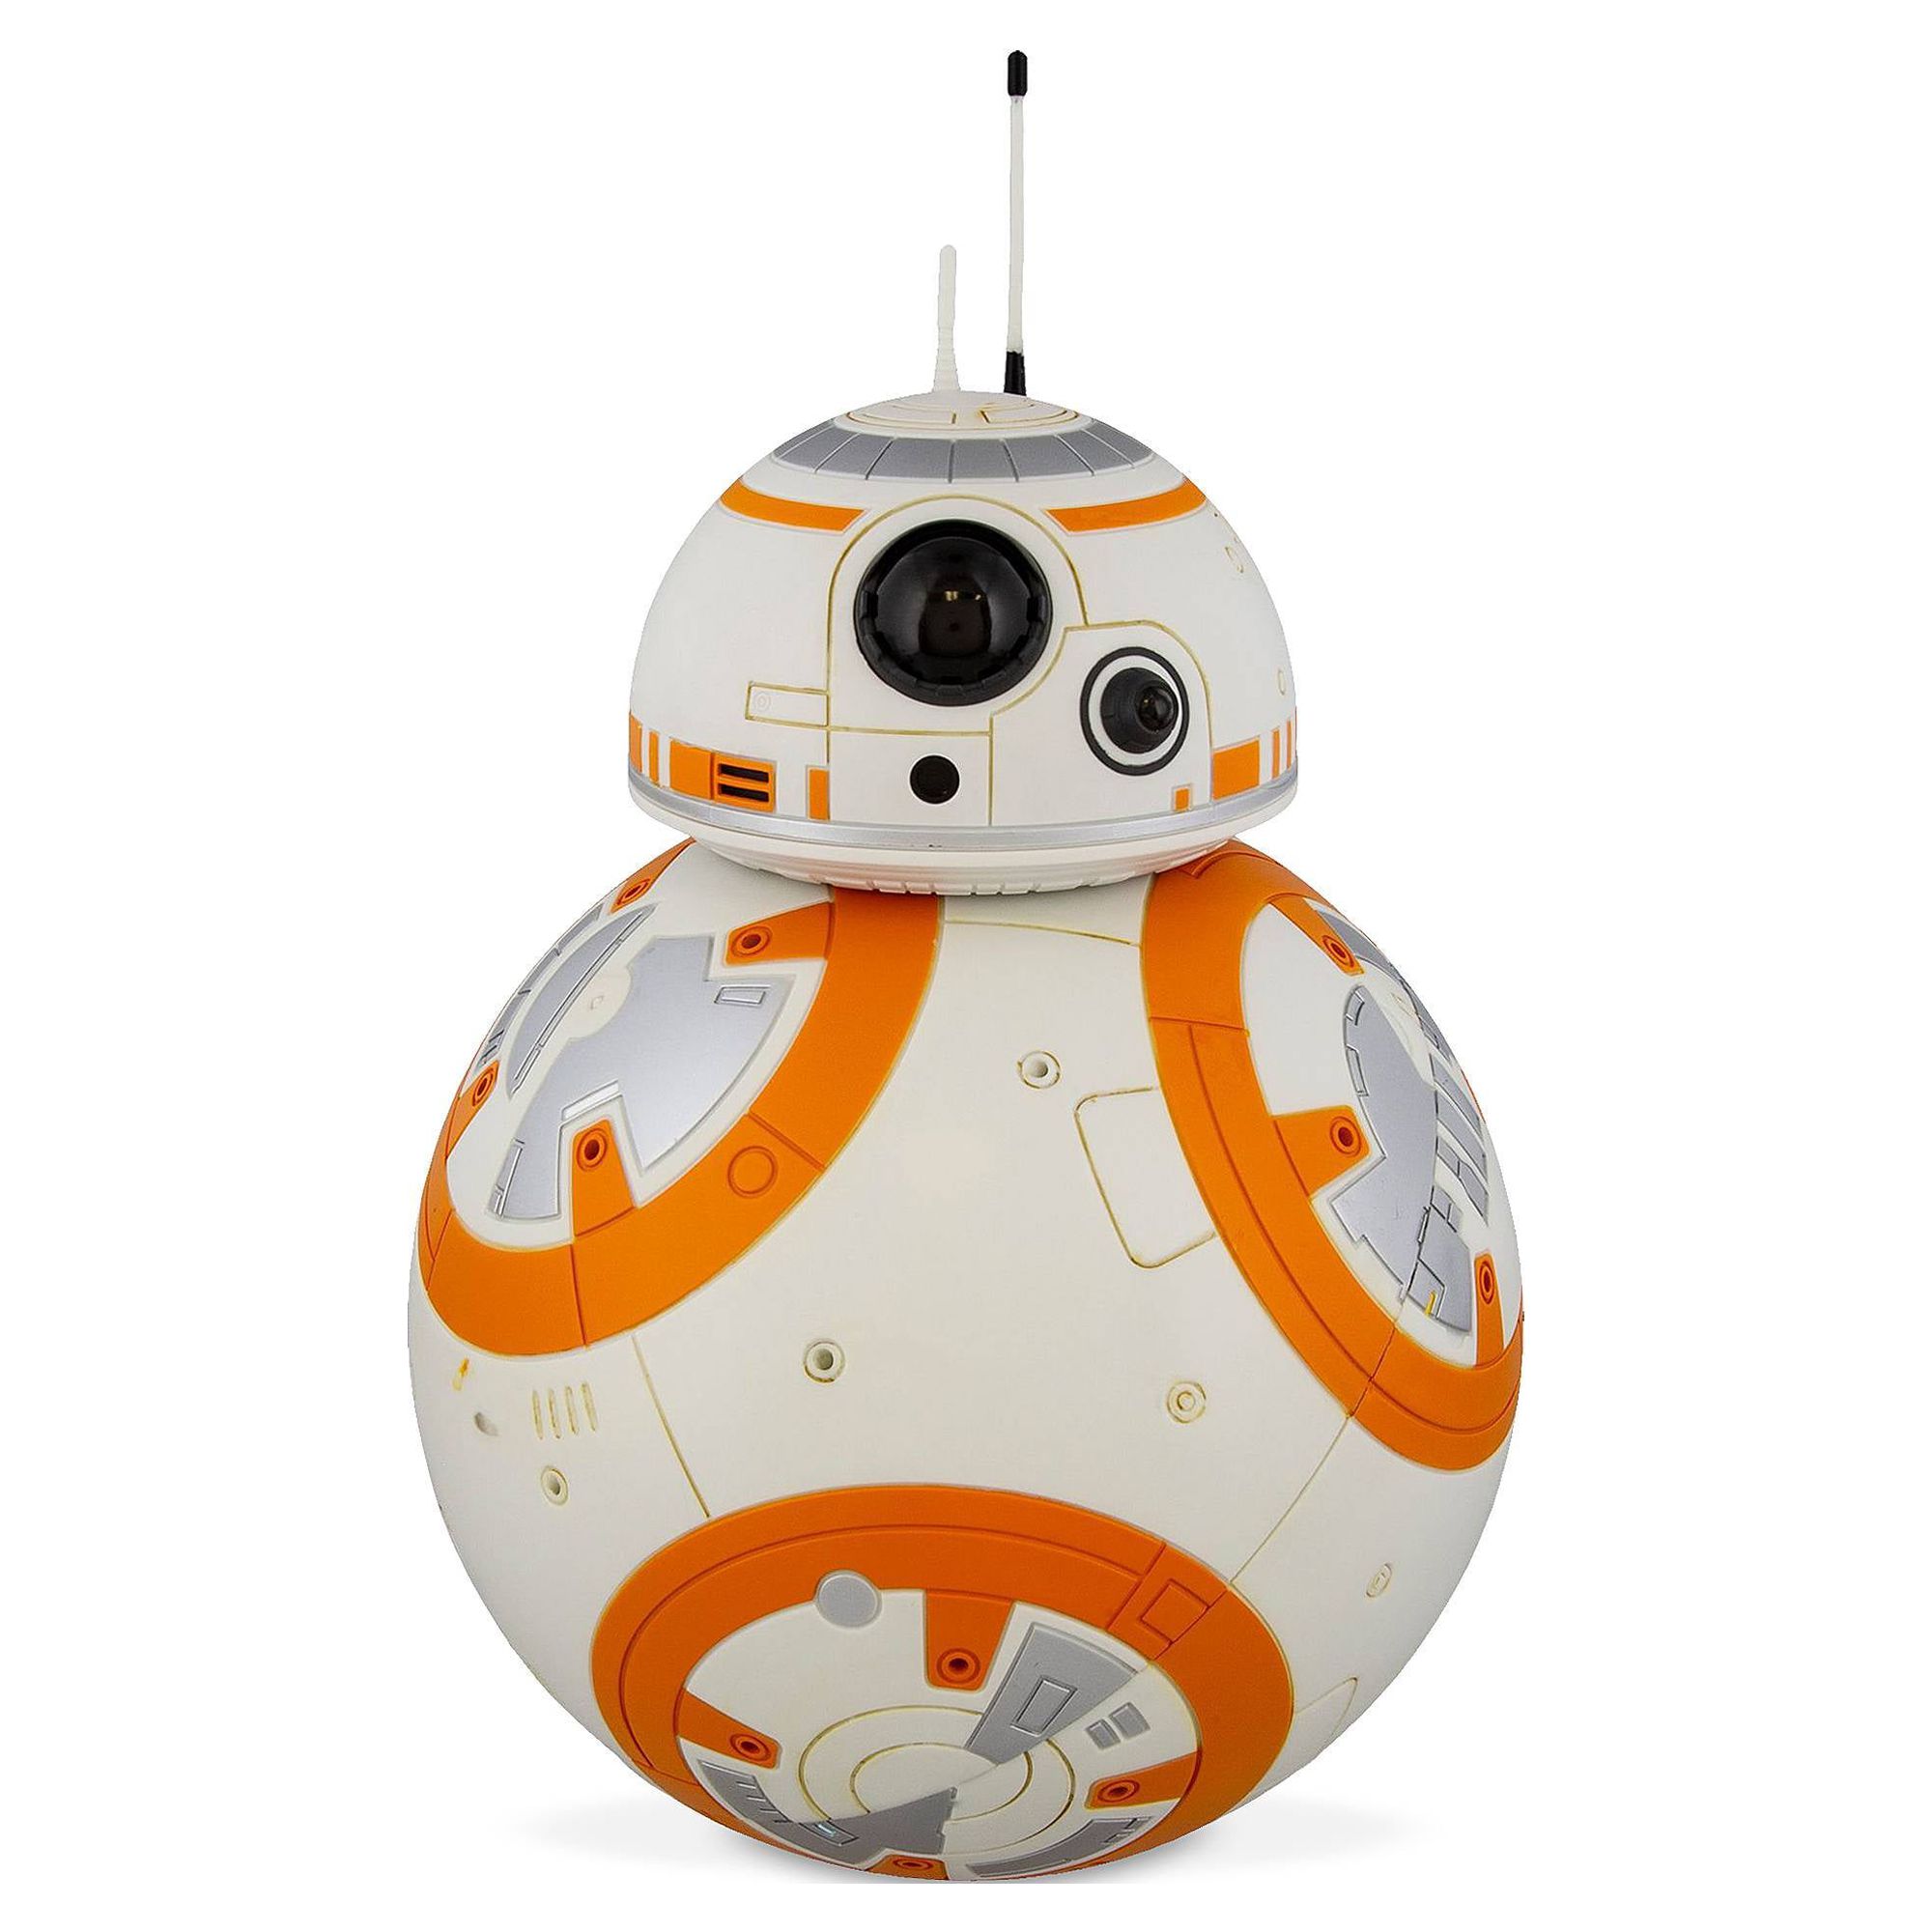 Disney Star Wars BB-8 Interactive Remote Control Droid Depot - H 11 2/5'' (to the top of his antenna) x L 7 1/8" x W 7 1/8" - image 3 of 3